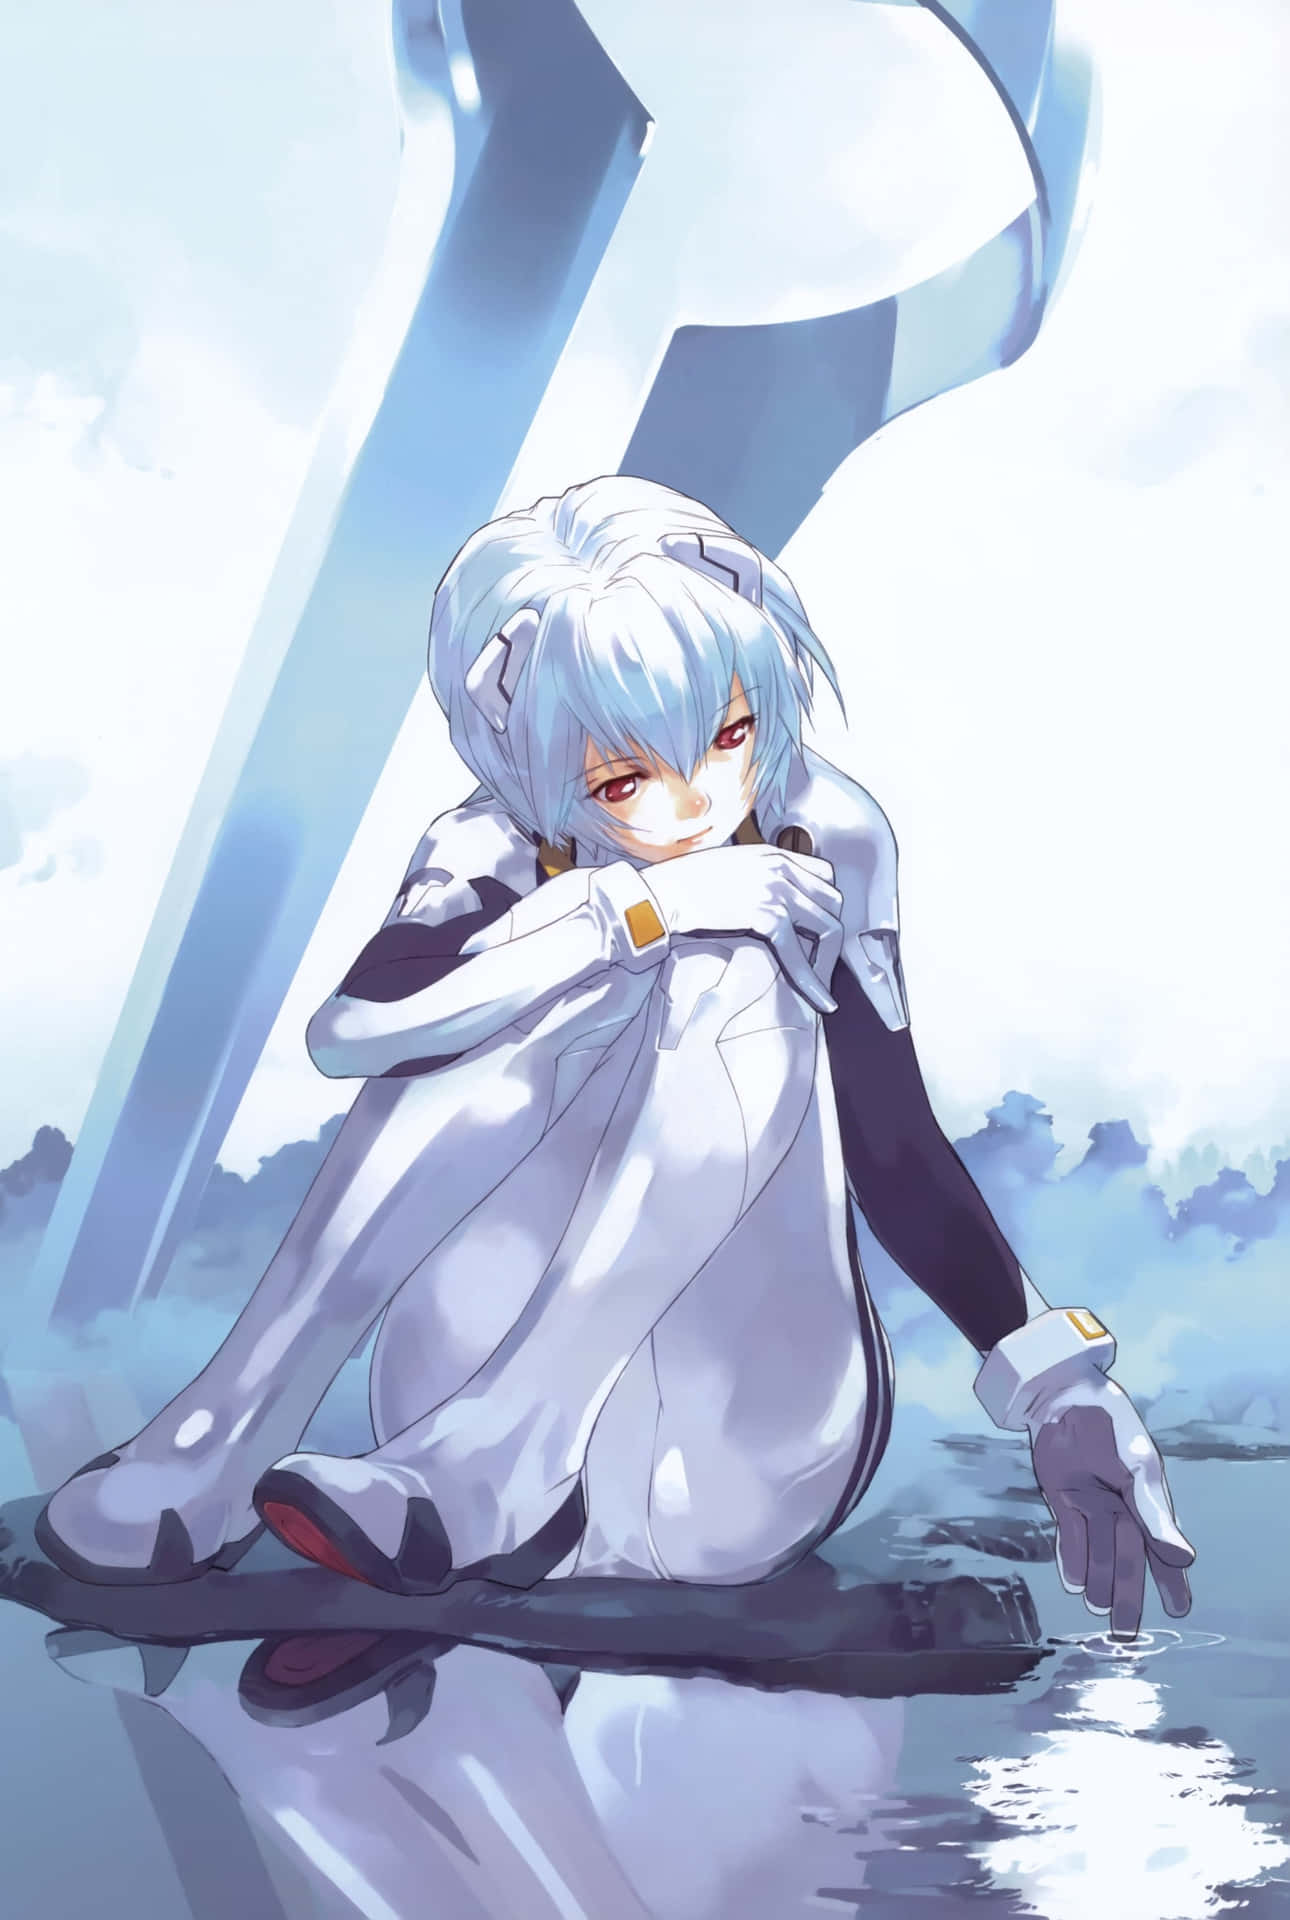 Rei Ayanami in a Mystical Pose Wallpaper